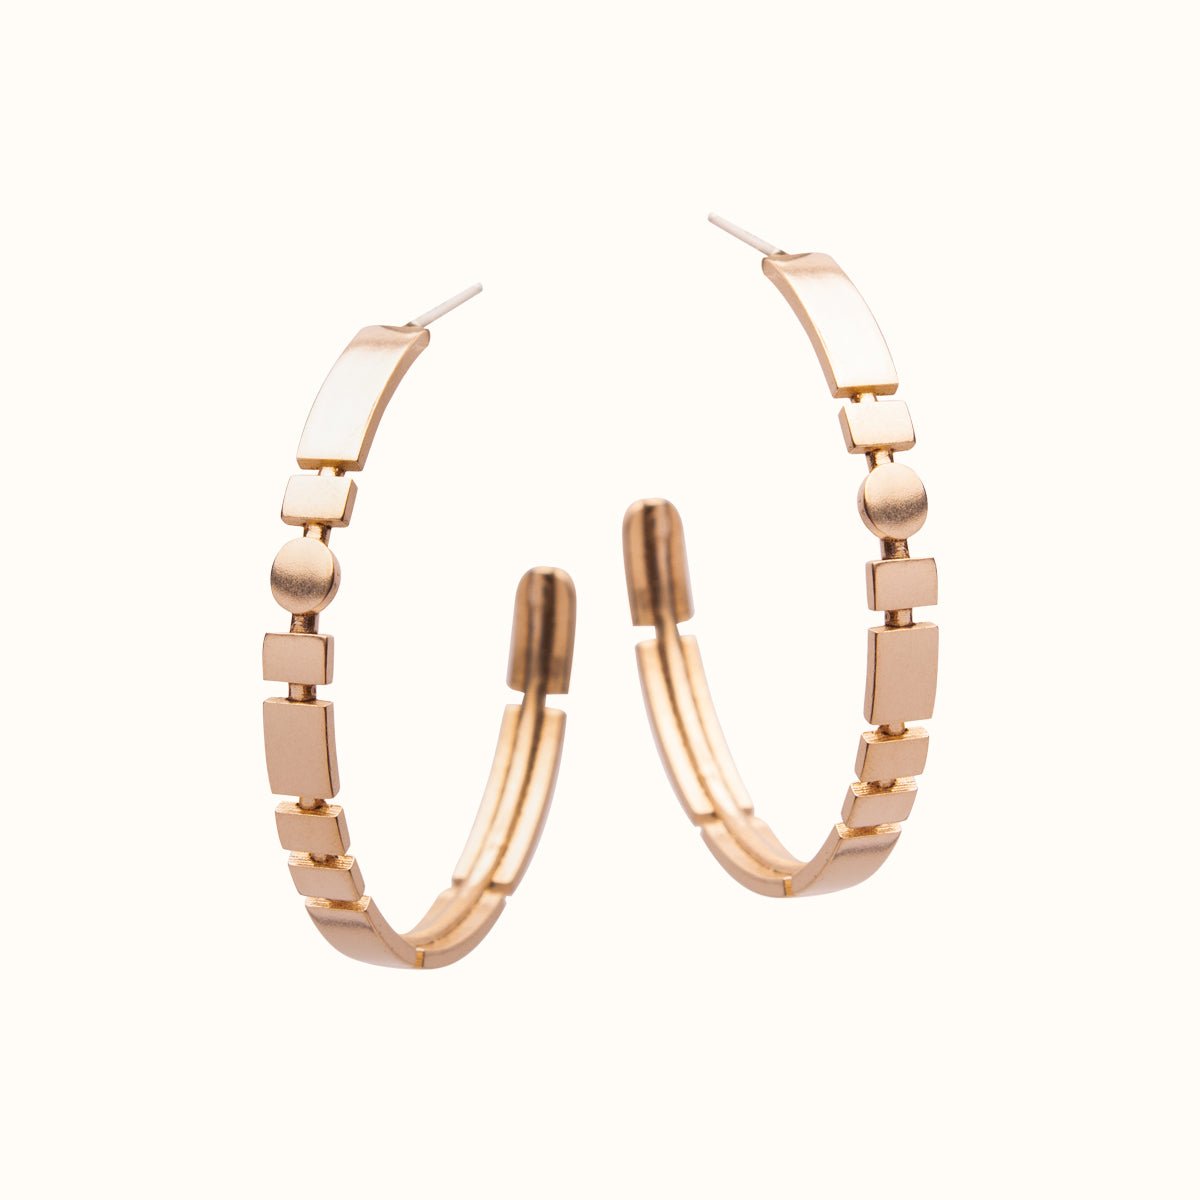 A narrow bronze hoop earring featuring alternating square and circular shapes.Designed and handcrafted in Portland, Oregon.